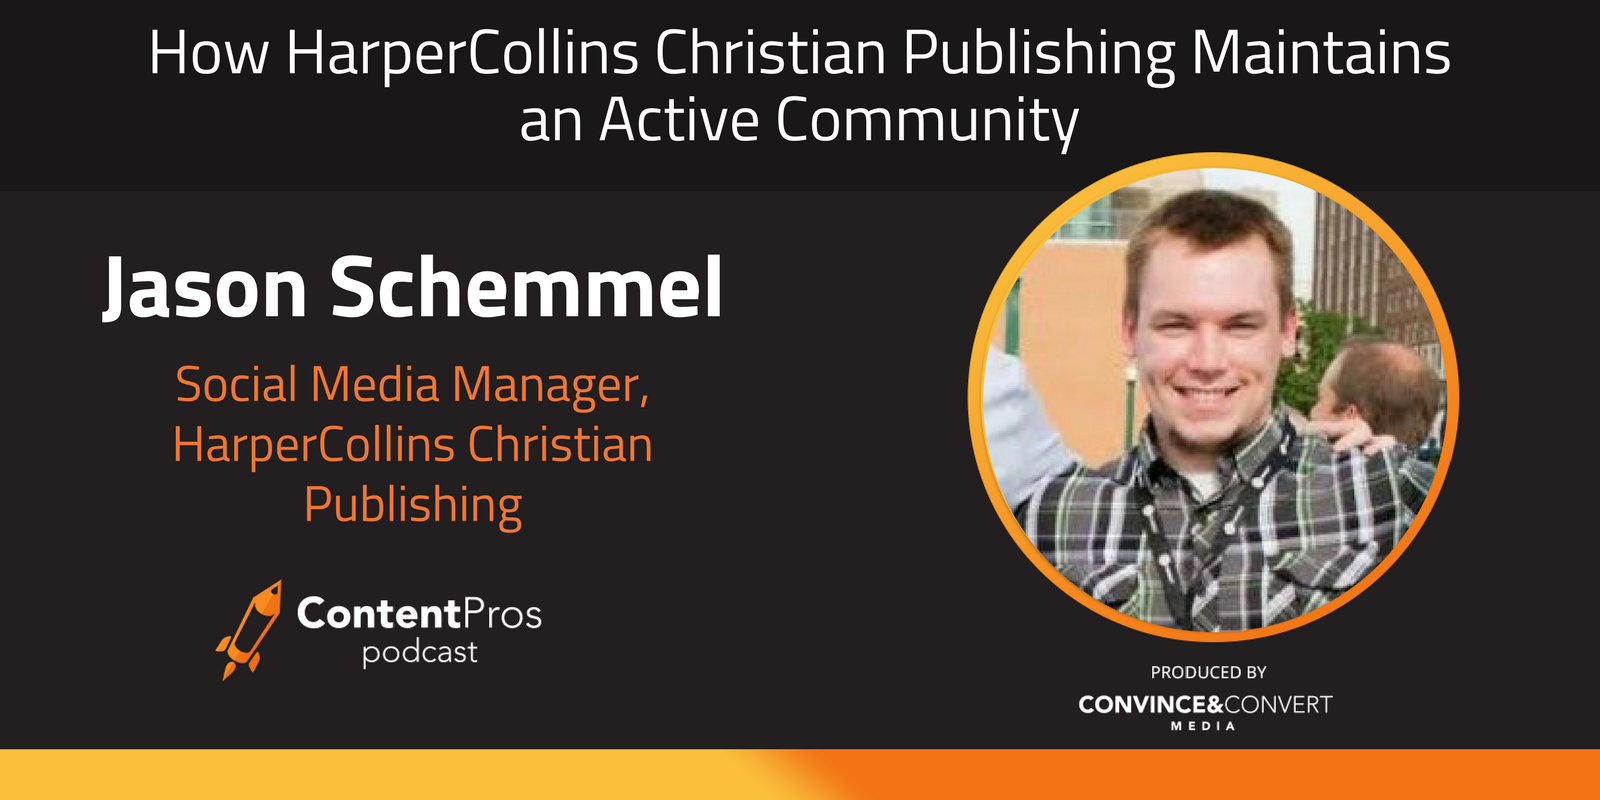 How HarperCollins Christian Publishing Maintains an Active Community